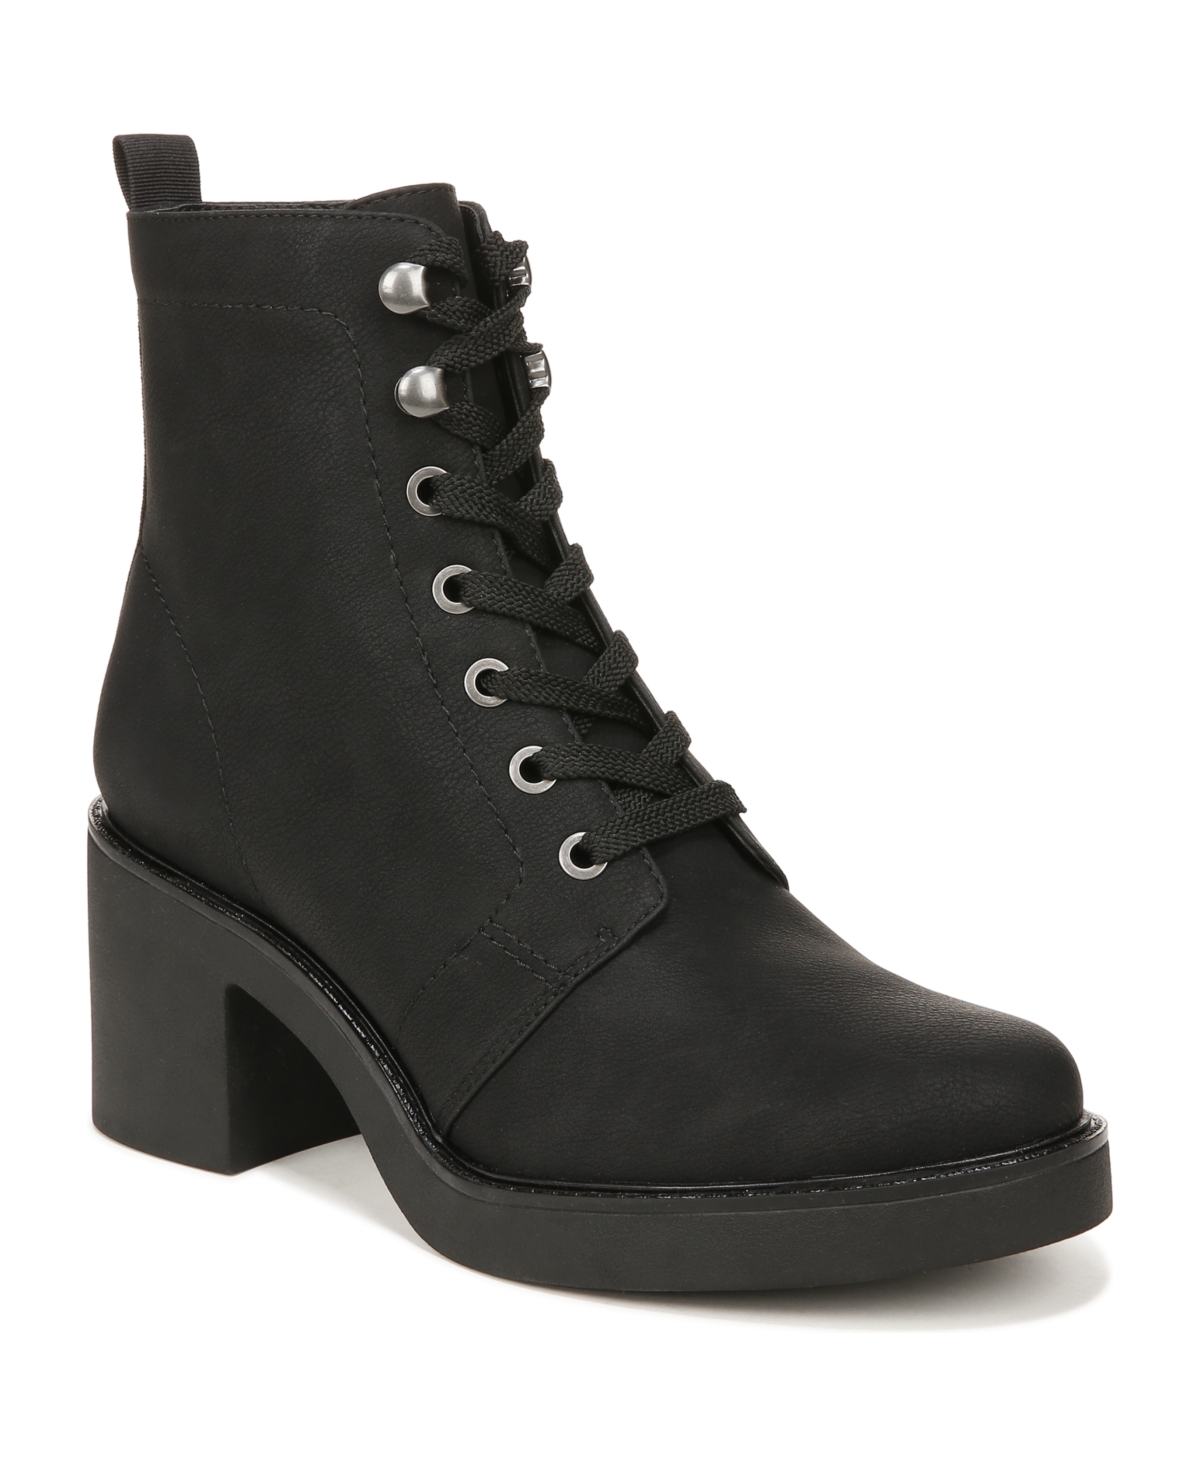 Rhodes Booties - Black Faux Leather